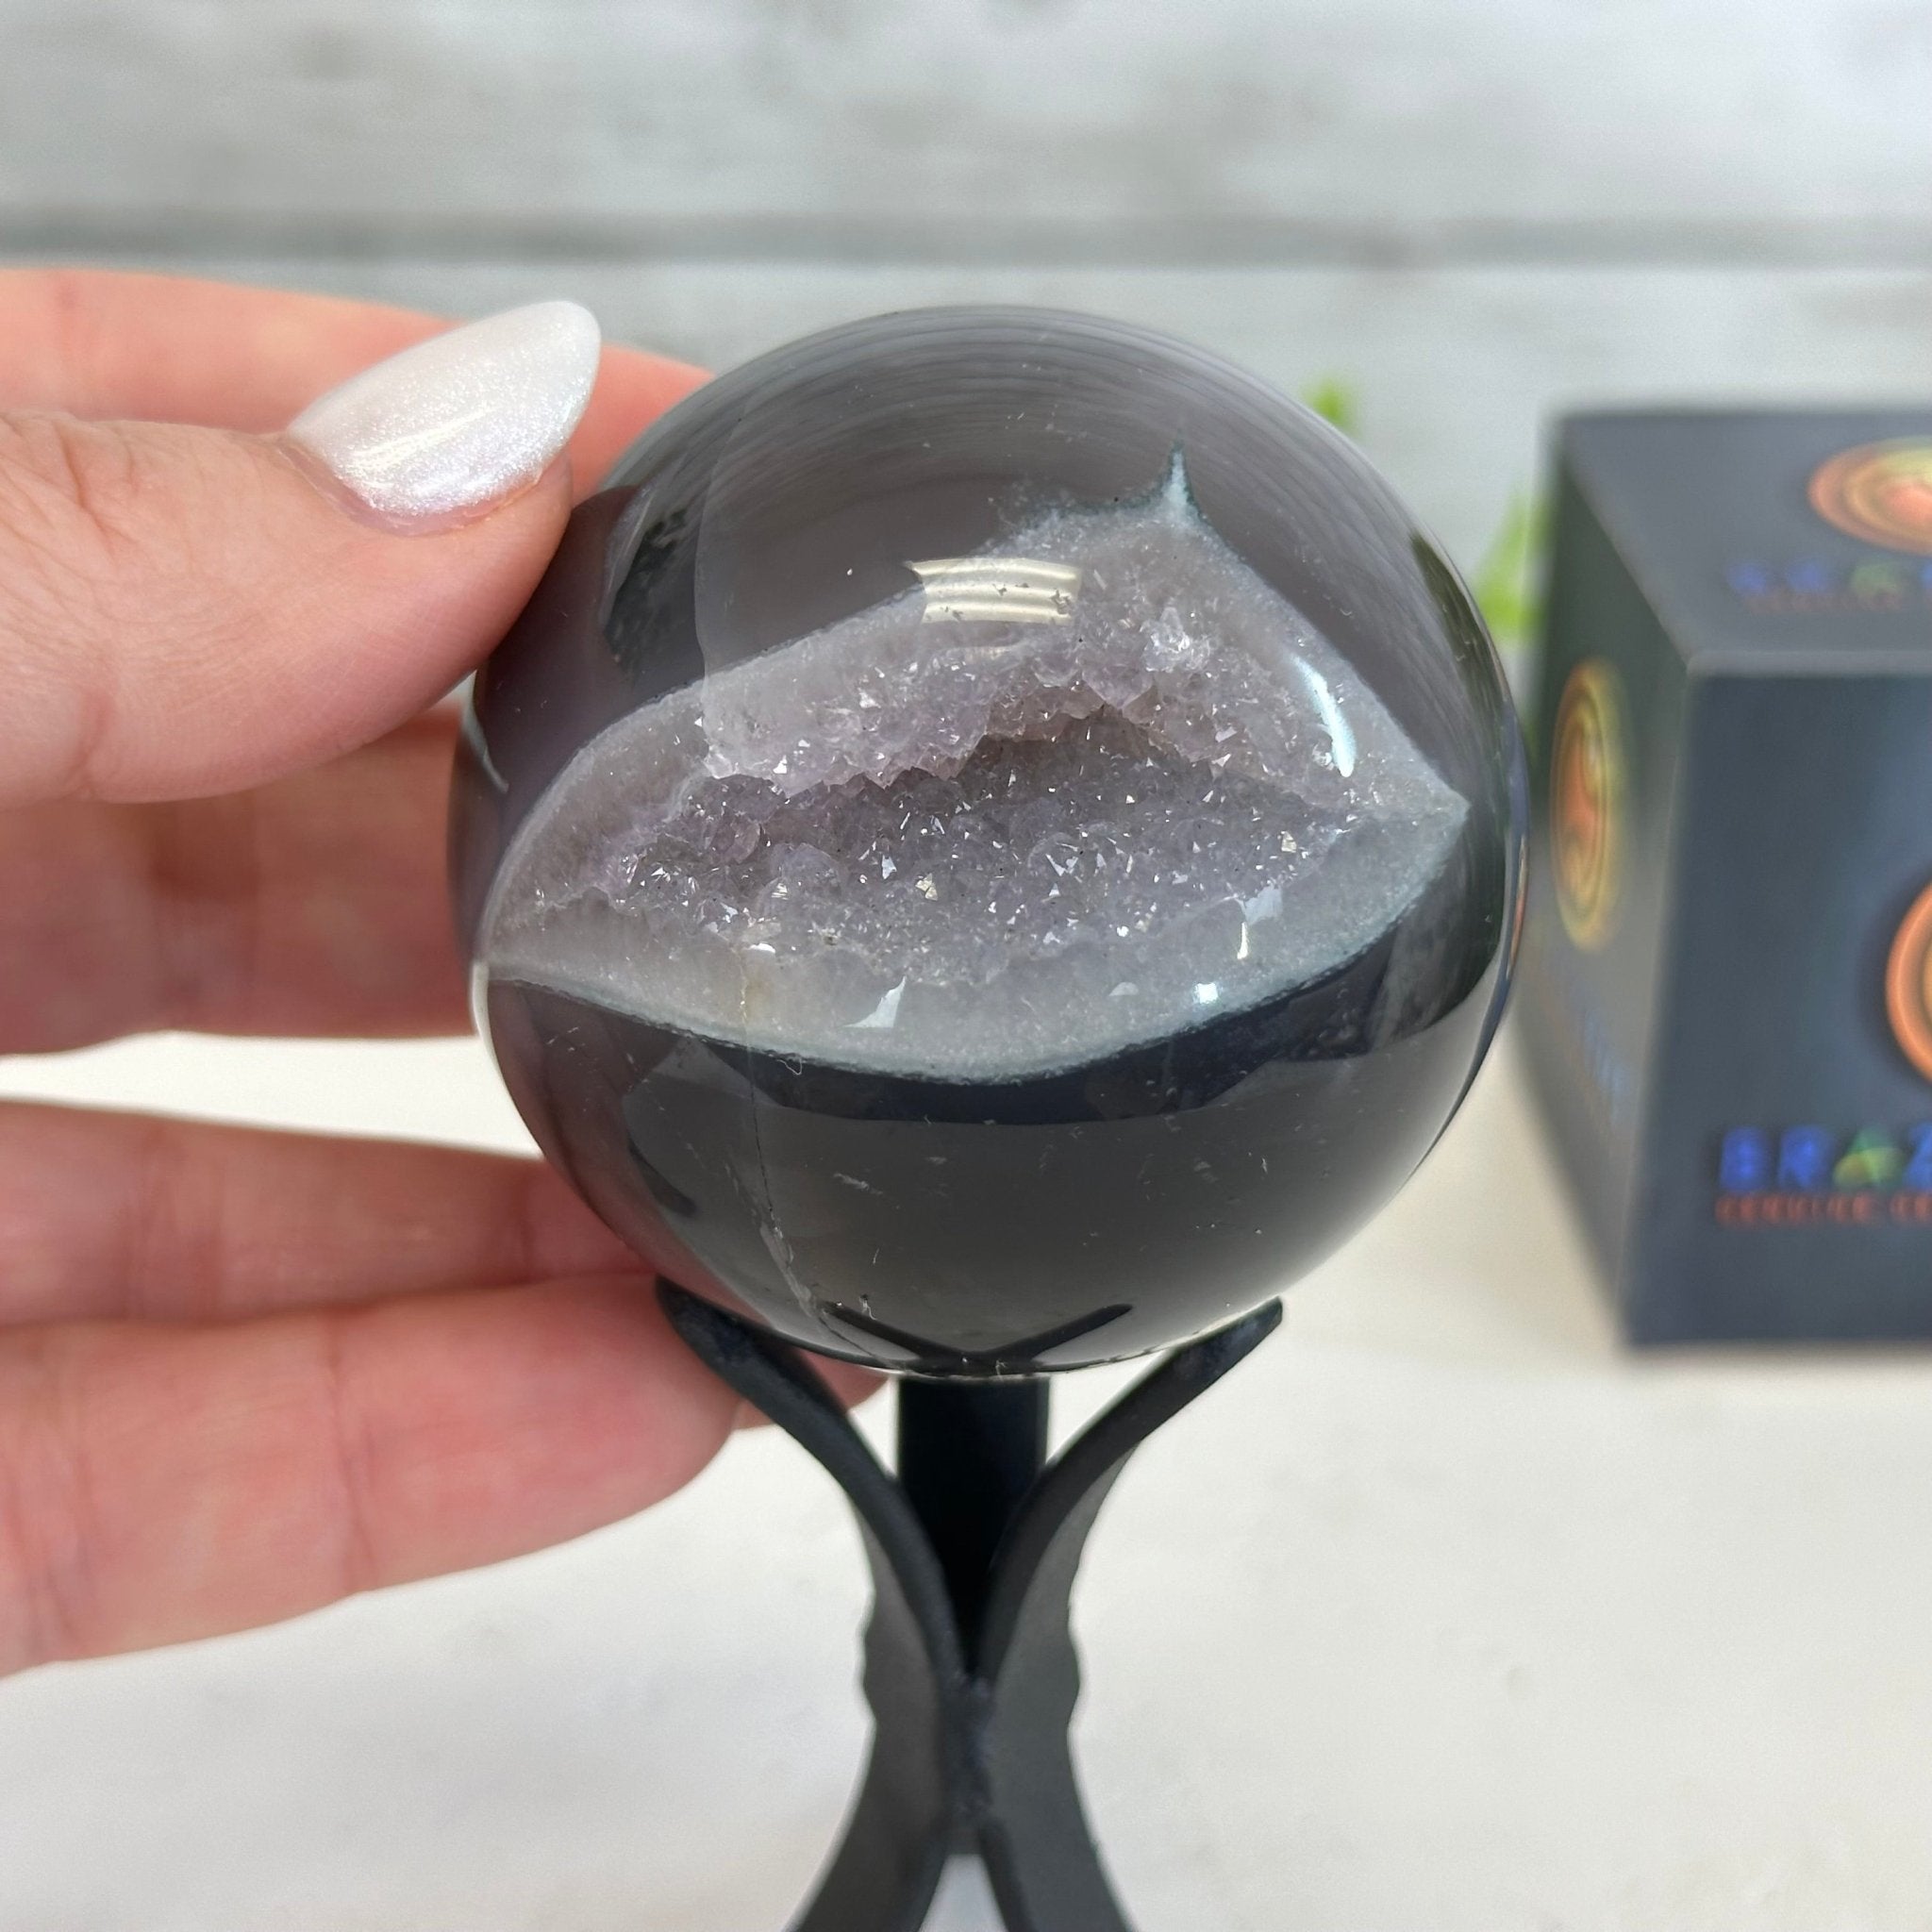 Druzy Agate Sphere on a Metal Stand, 0.6 lbs & 4.8" Tall #5634-0002 - Brazil GemsBrazil GemsDruzy Agate Sphere on a Metal Stand, 0.6 lbs & 4.8" Tall #5634-0002Spheres5634-0002